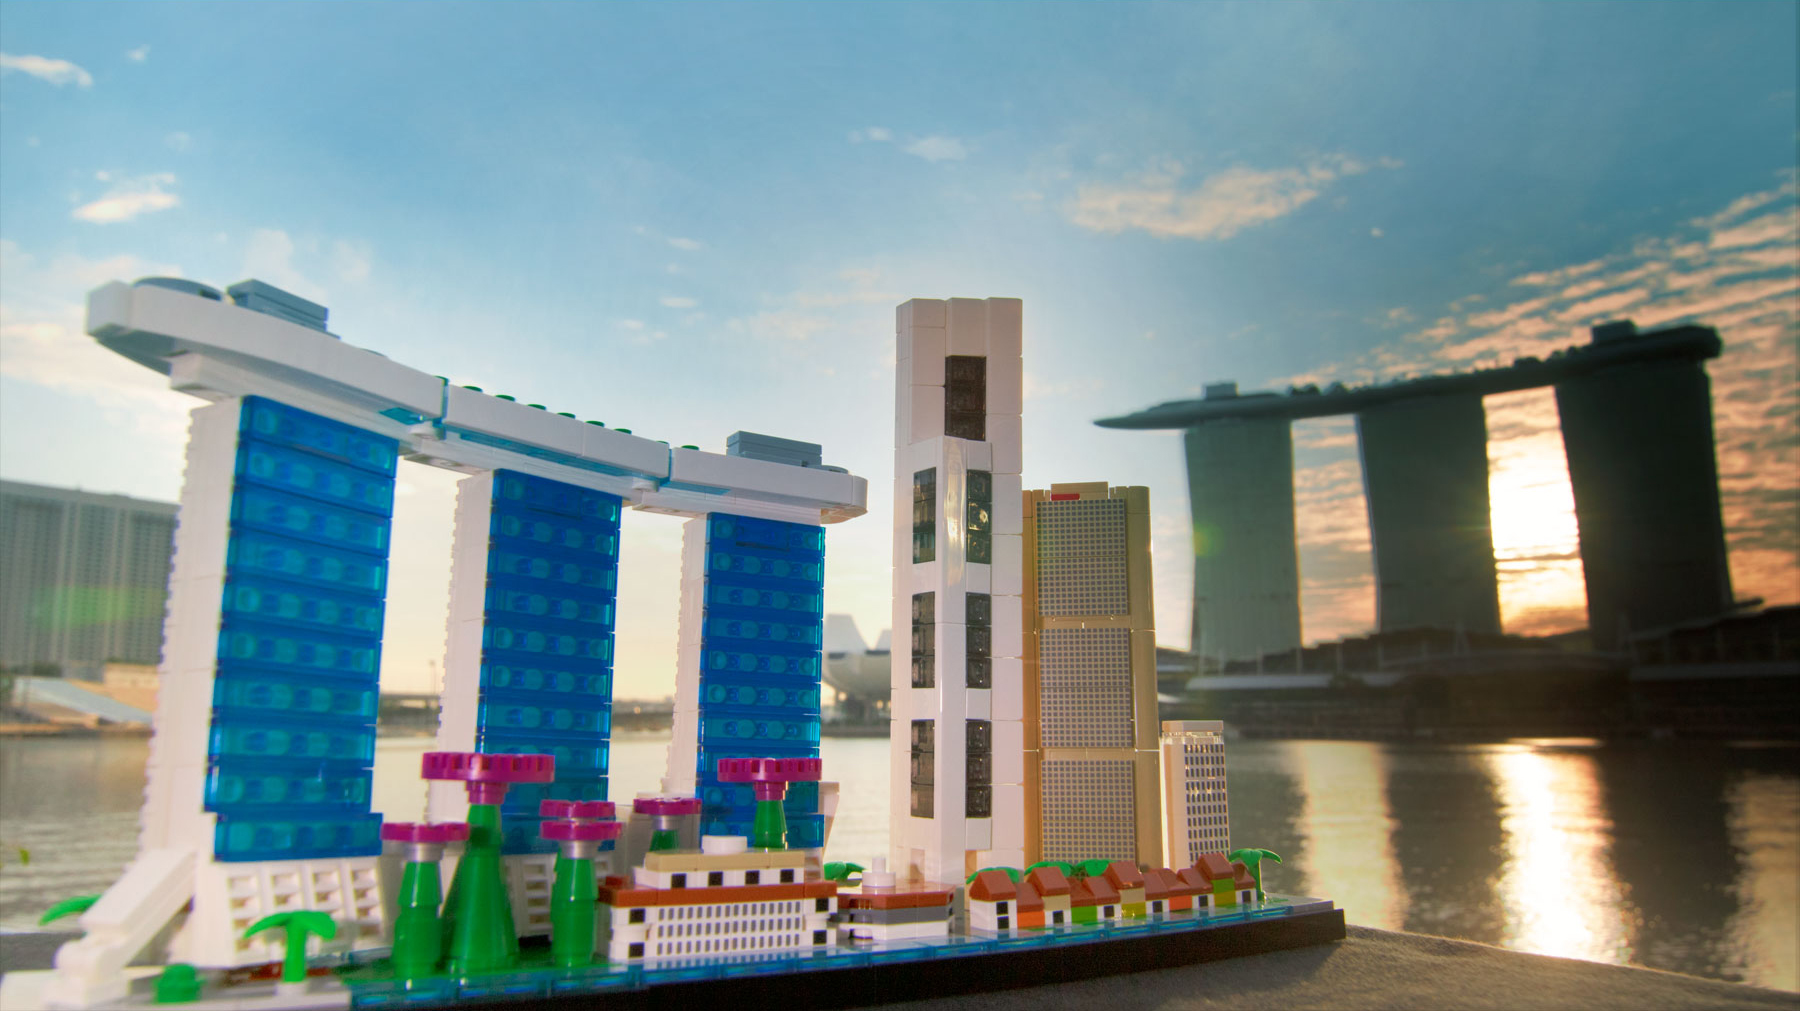 LEGO Architecture Singapore Skyline set 21057 with the real Marina Bay Sands in Singapore